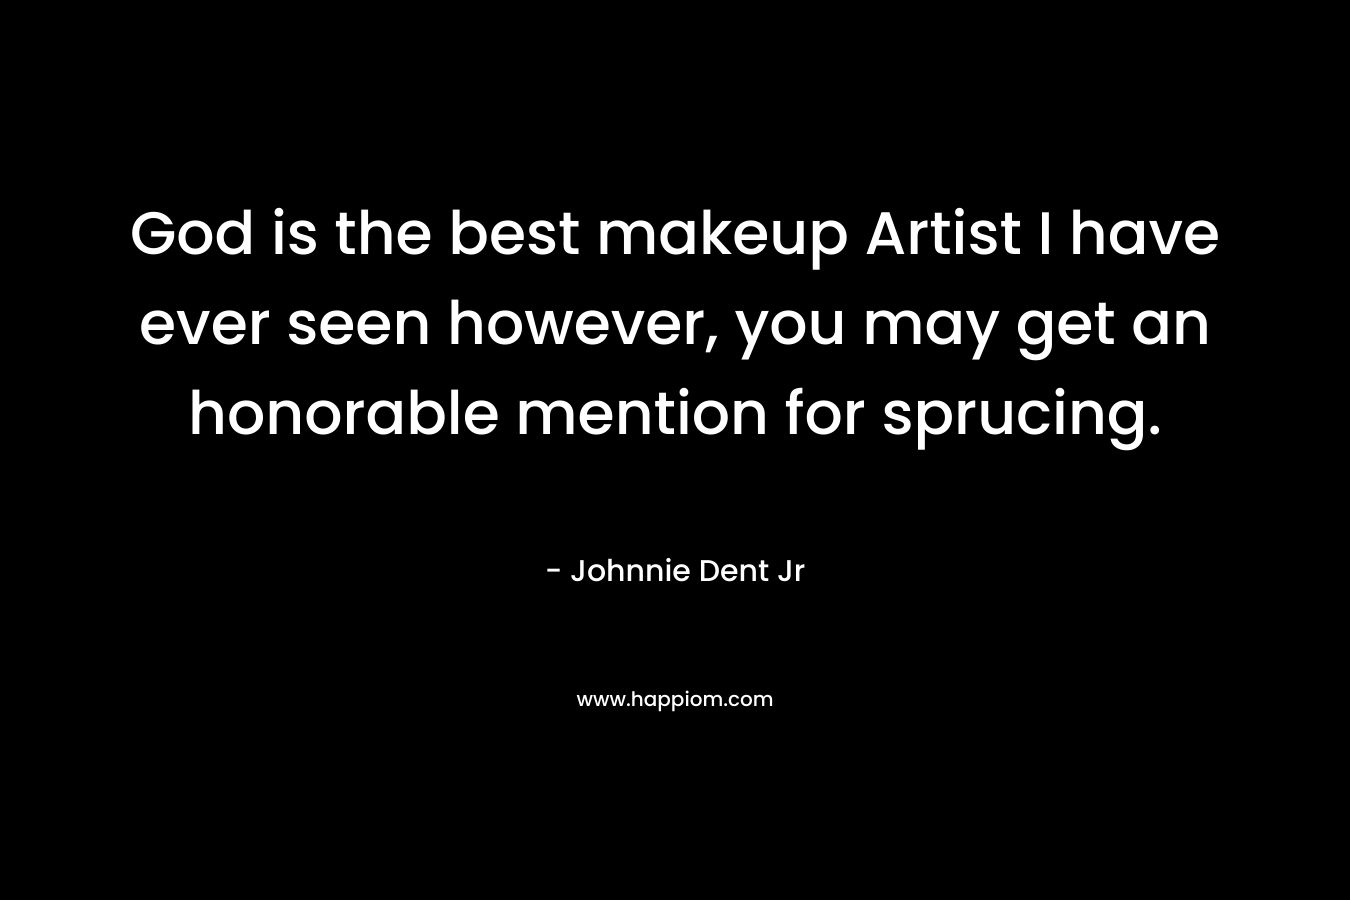 God is the best makeup Artist I have ever seen however, you may get an honorable mention for sprucing. – Johnnie Dent Jr